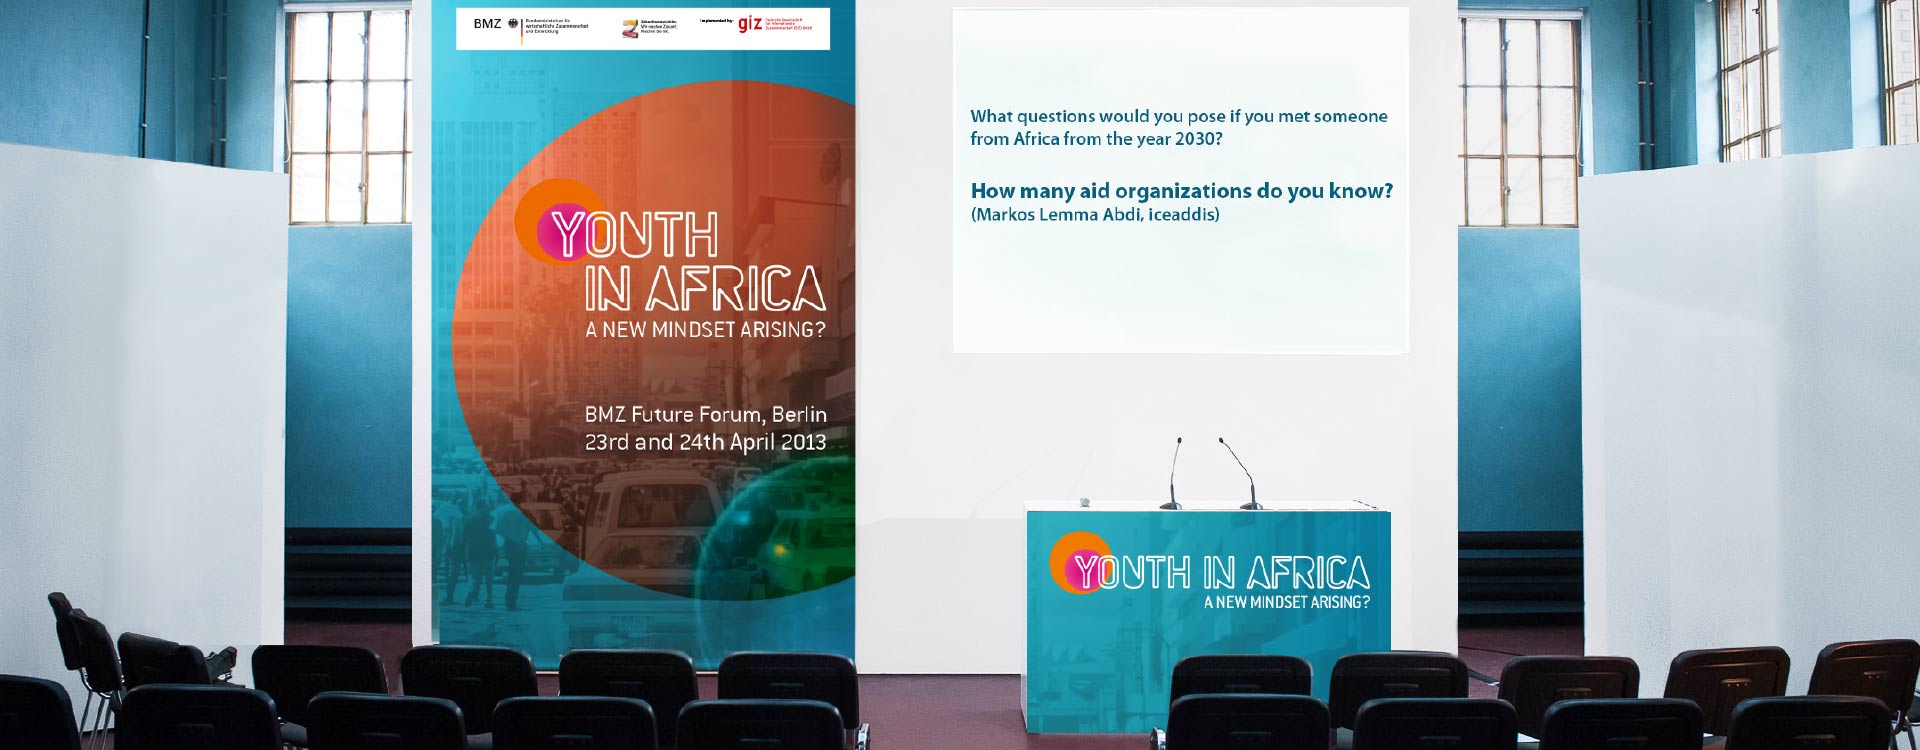 Stage and lectern for the Youth in Africa conference held by the BMZ in the Umspannwerk Kreuzberg, Berlin; Design: Kattrin Richter | Graphic Design Studio